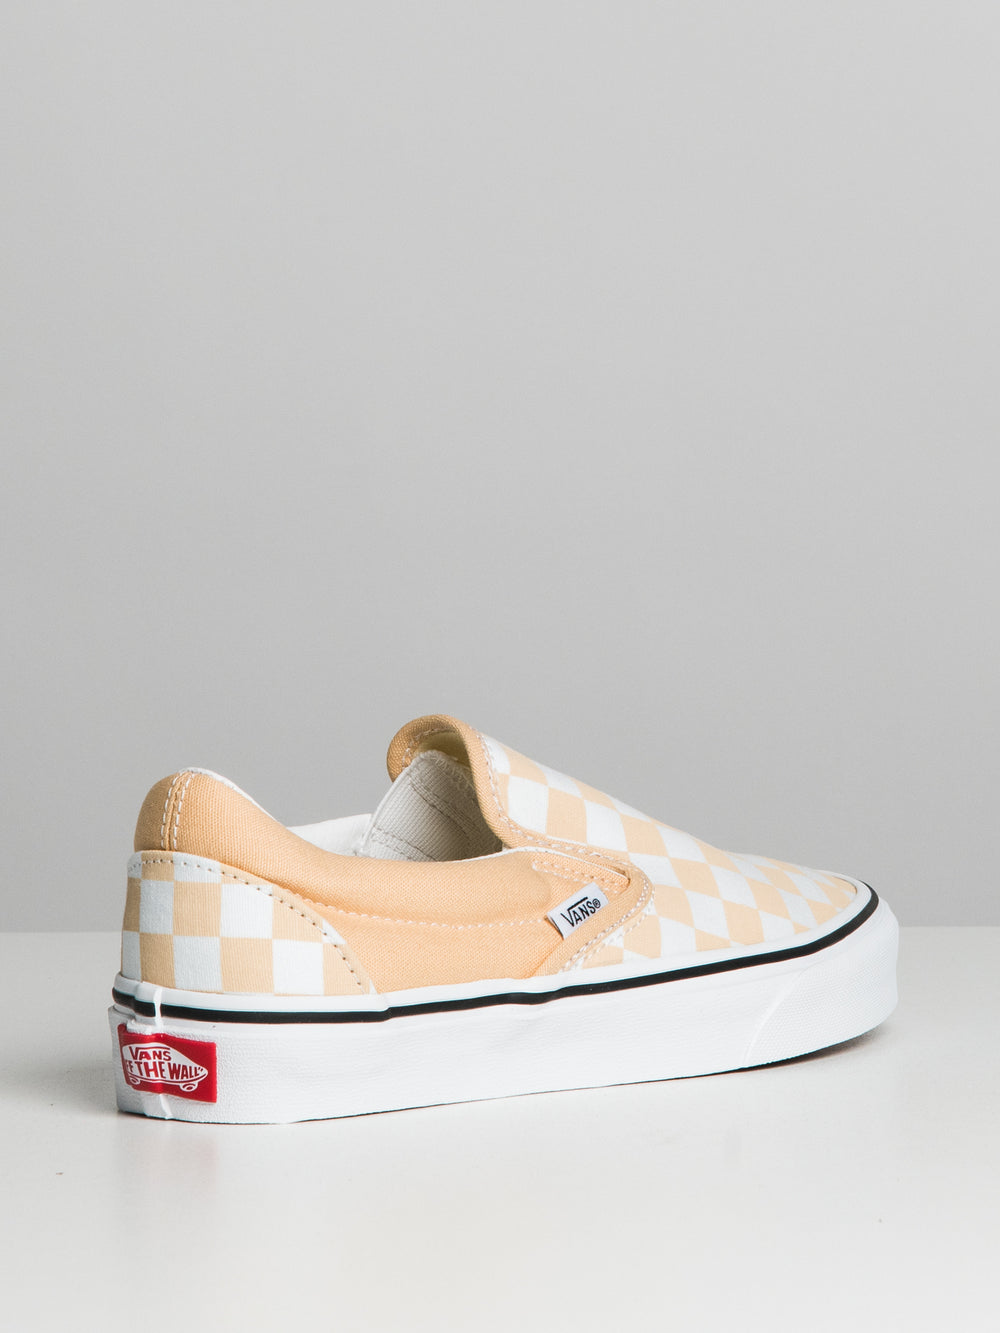 WOMENS VANS CLASSIC SLIP ON - CLEARANCE